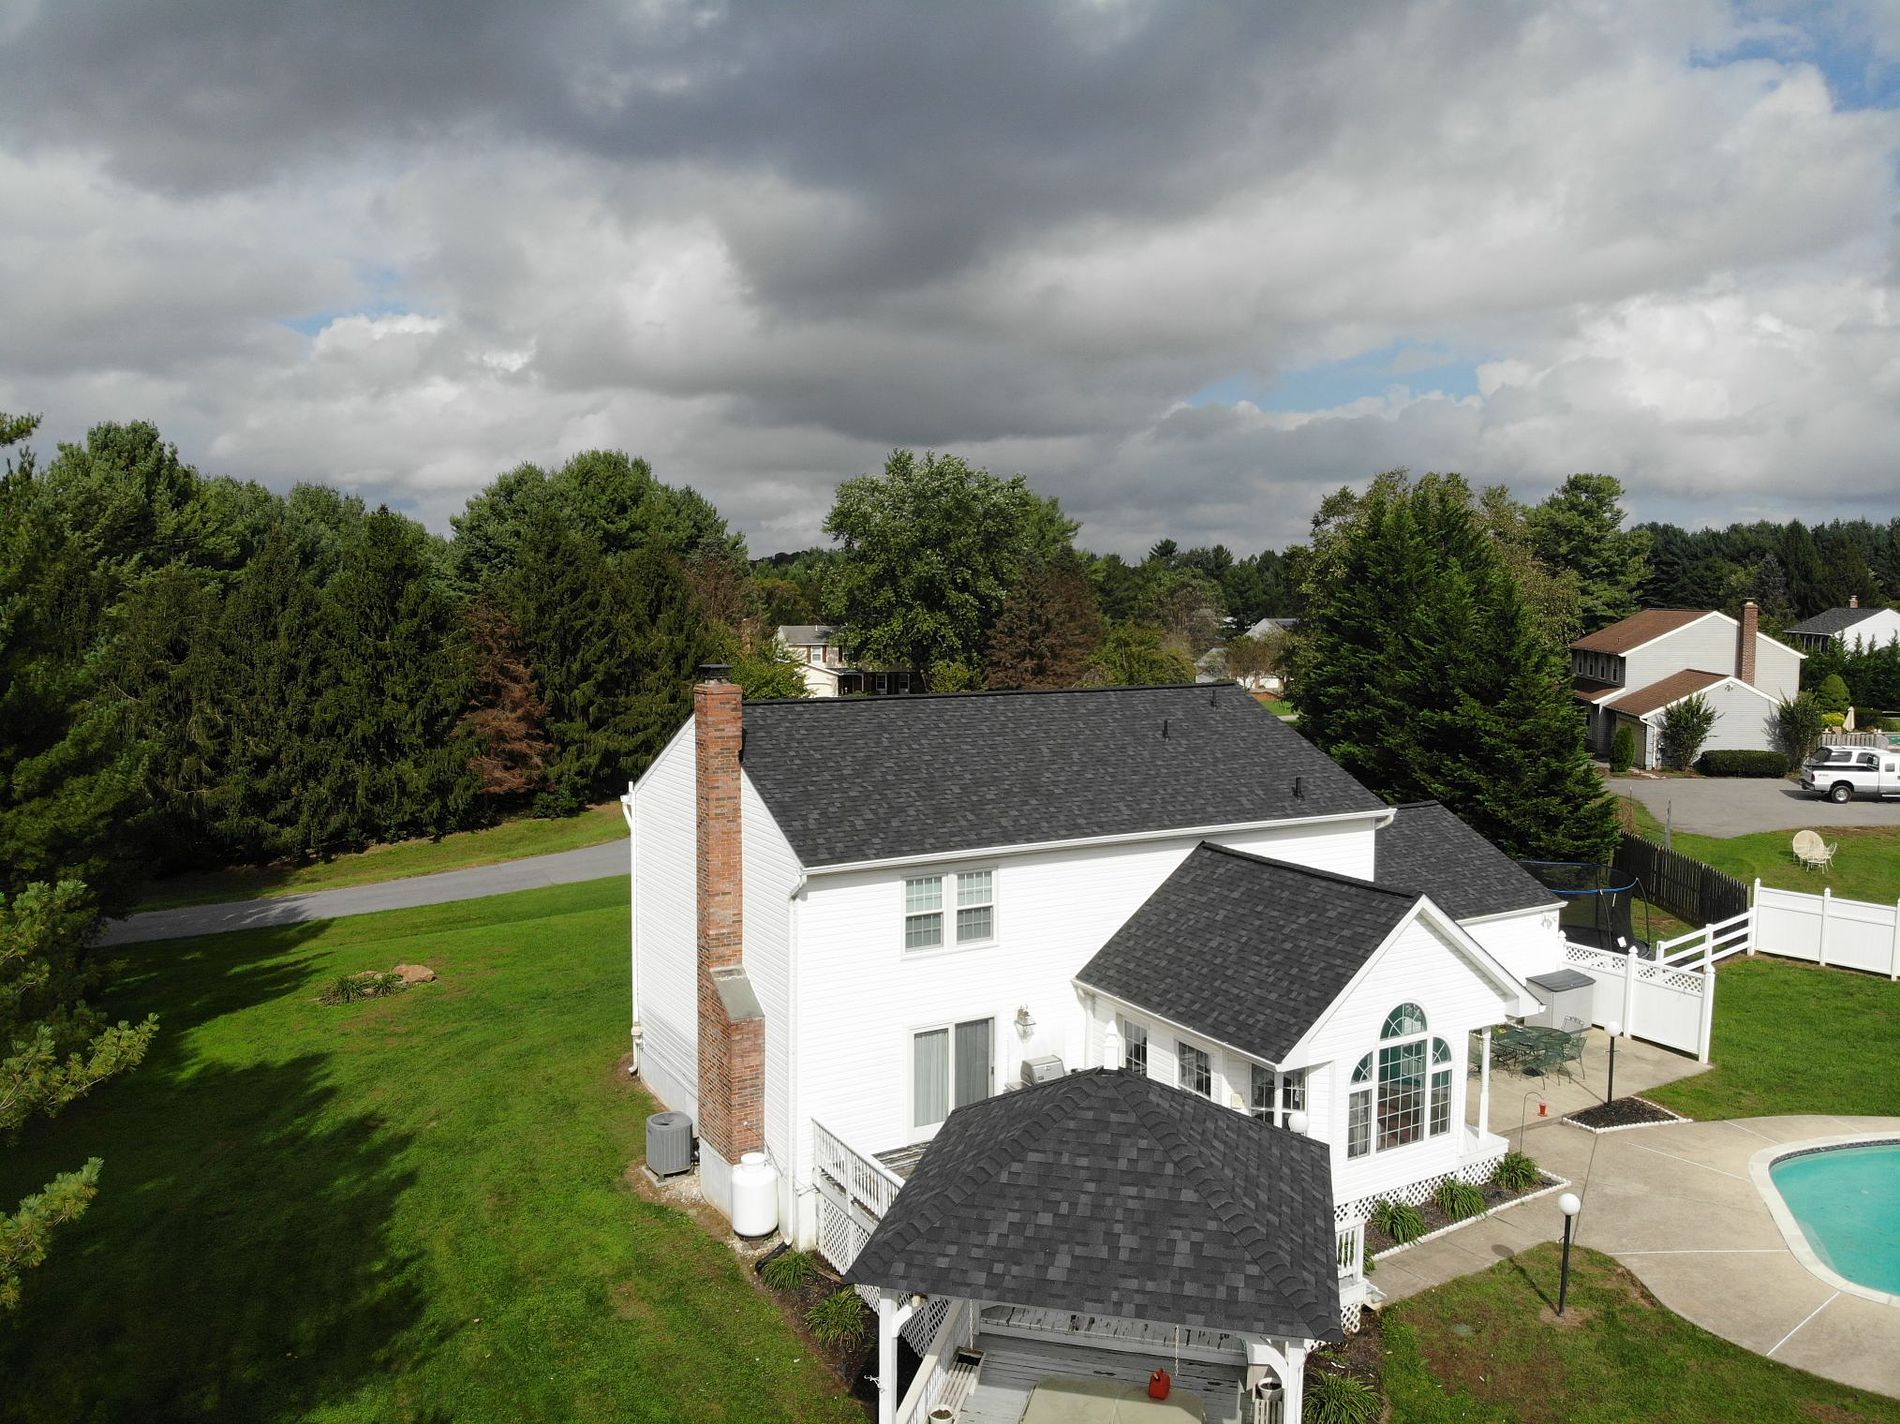 Residential Roofing Services in Frederick, MD